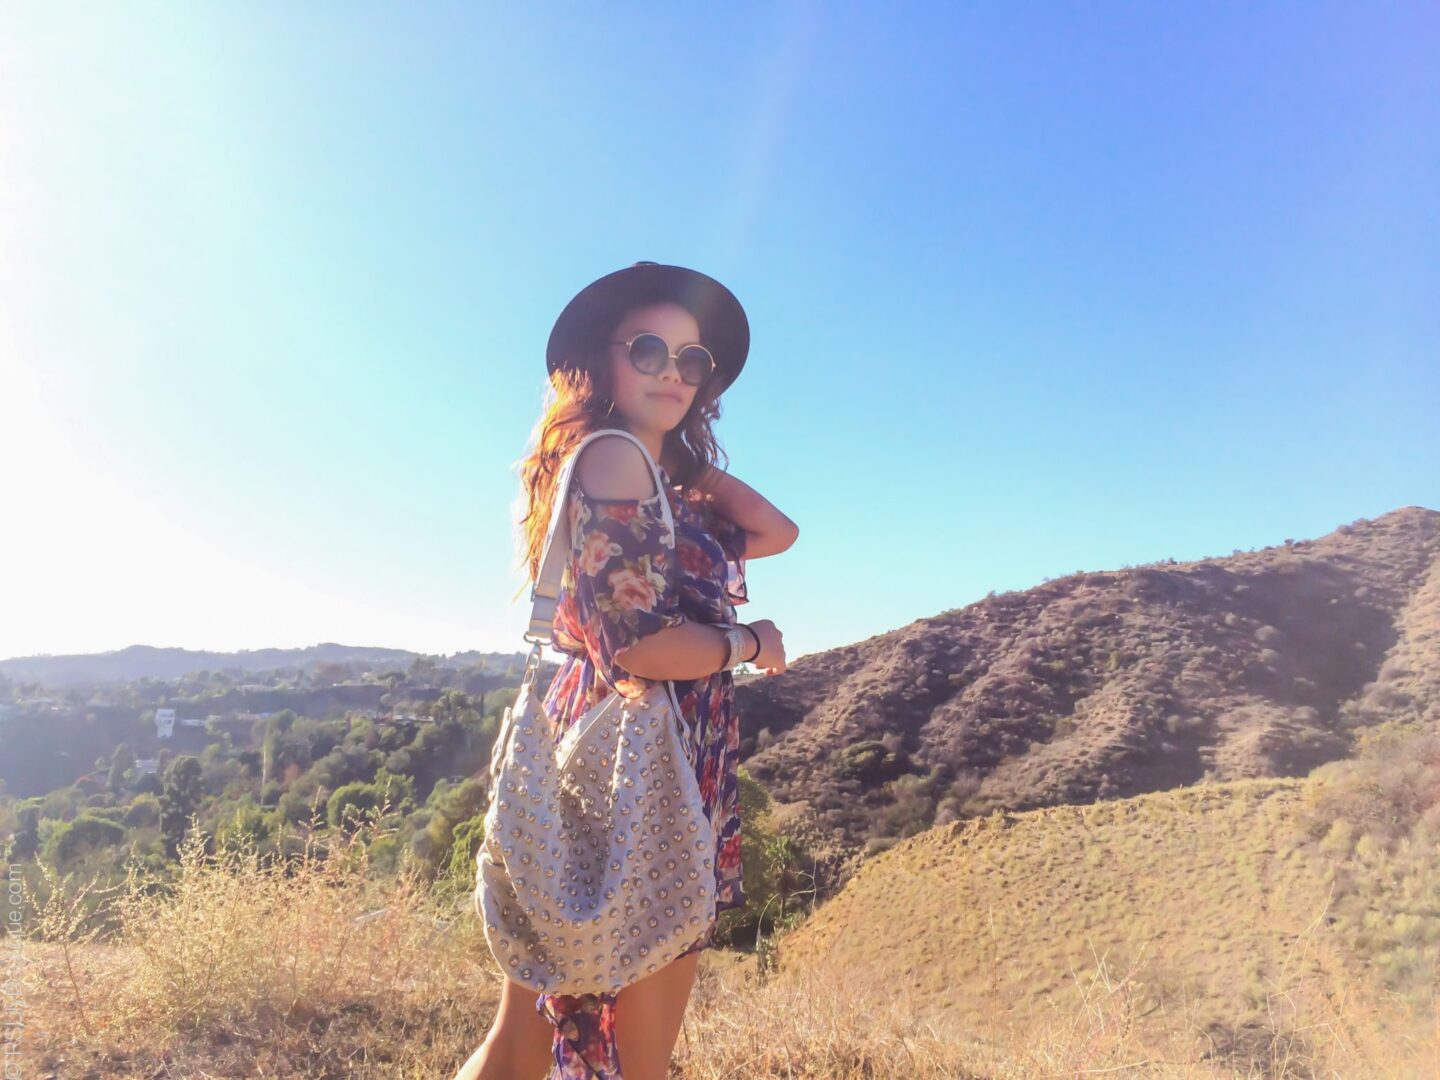 instagram-pslilyboutique-los-angeles-fashion-blogger-ootd-fall-2015-outfit-ideas-10-31-15